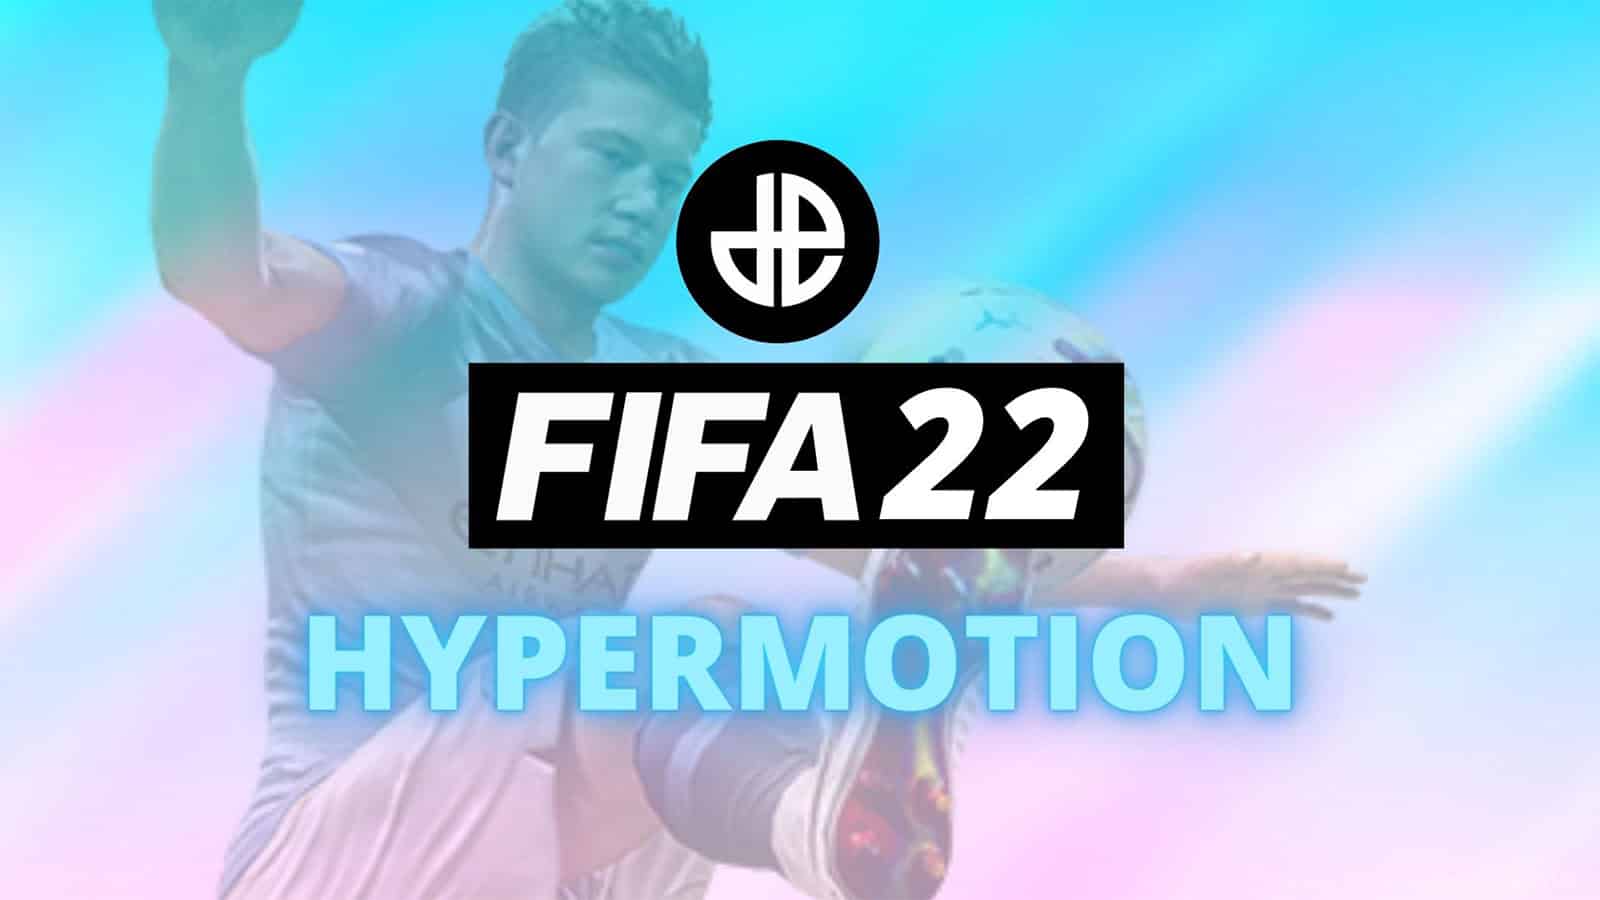 27 years later, EA finally confirm FIFA 22 is “powered by football